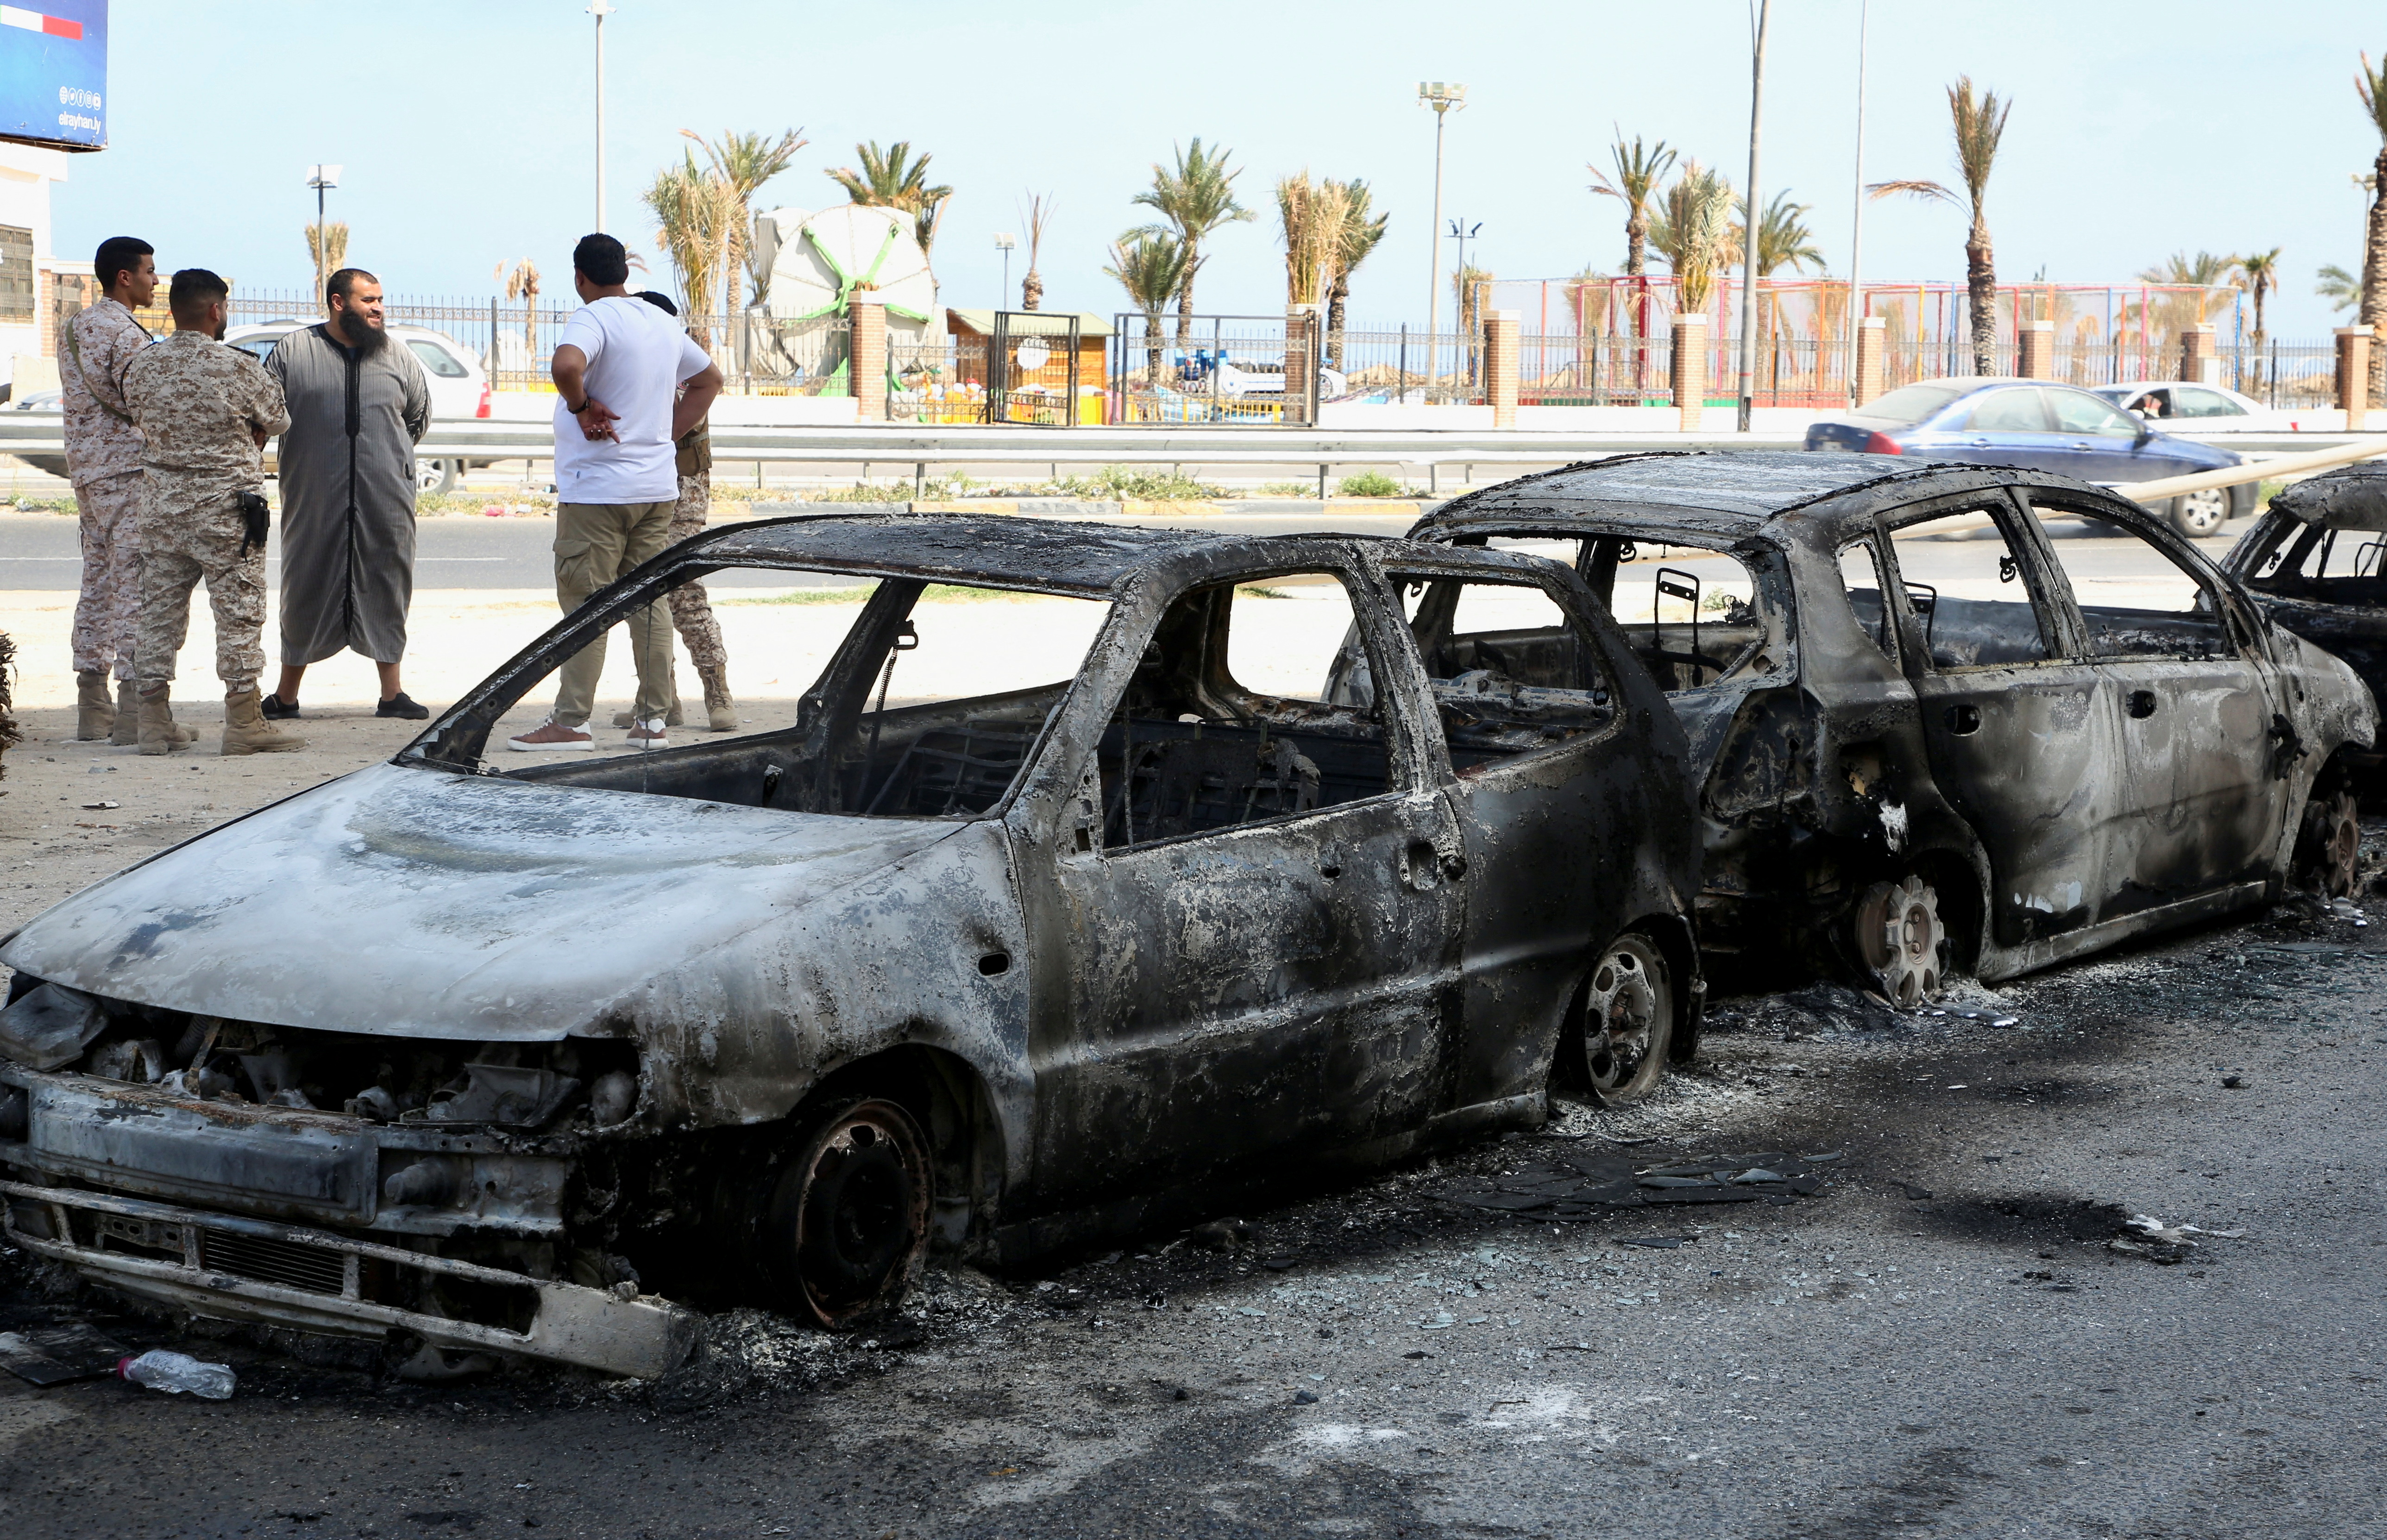 Vehicles destroyed after fighting between soldiers loyal to the head of Libya's Government of National Unity, Abdulhamid al-Dbeibah, and rival forces, are seen in Tripoli